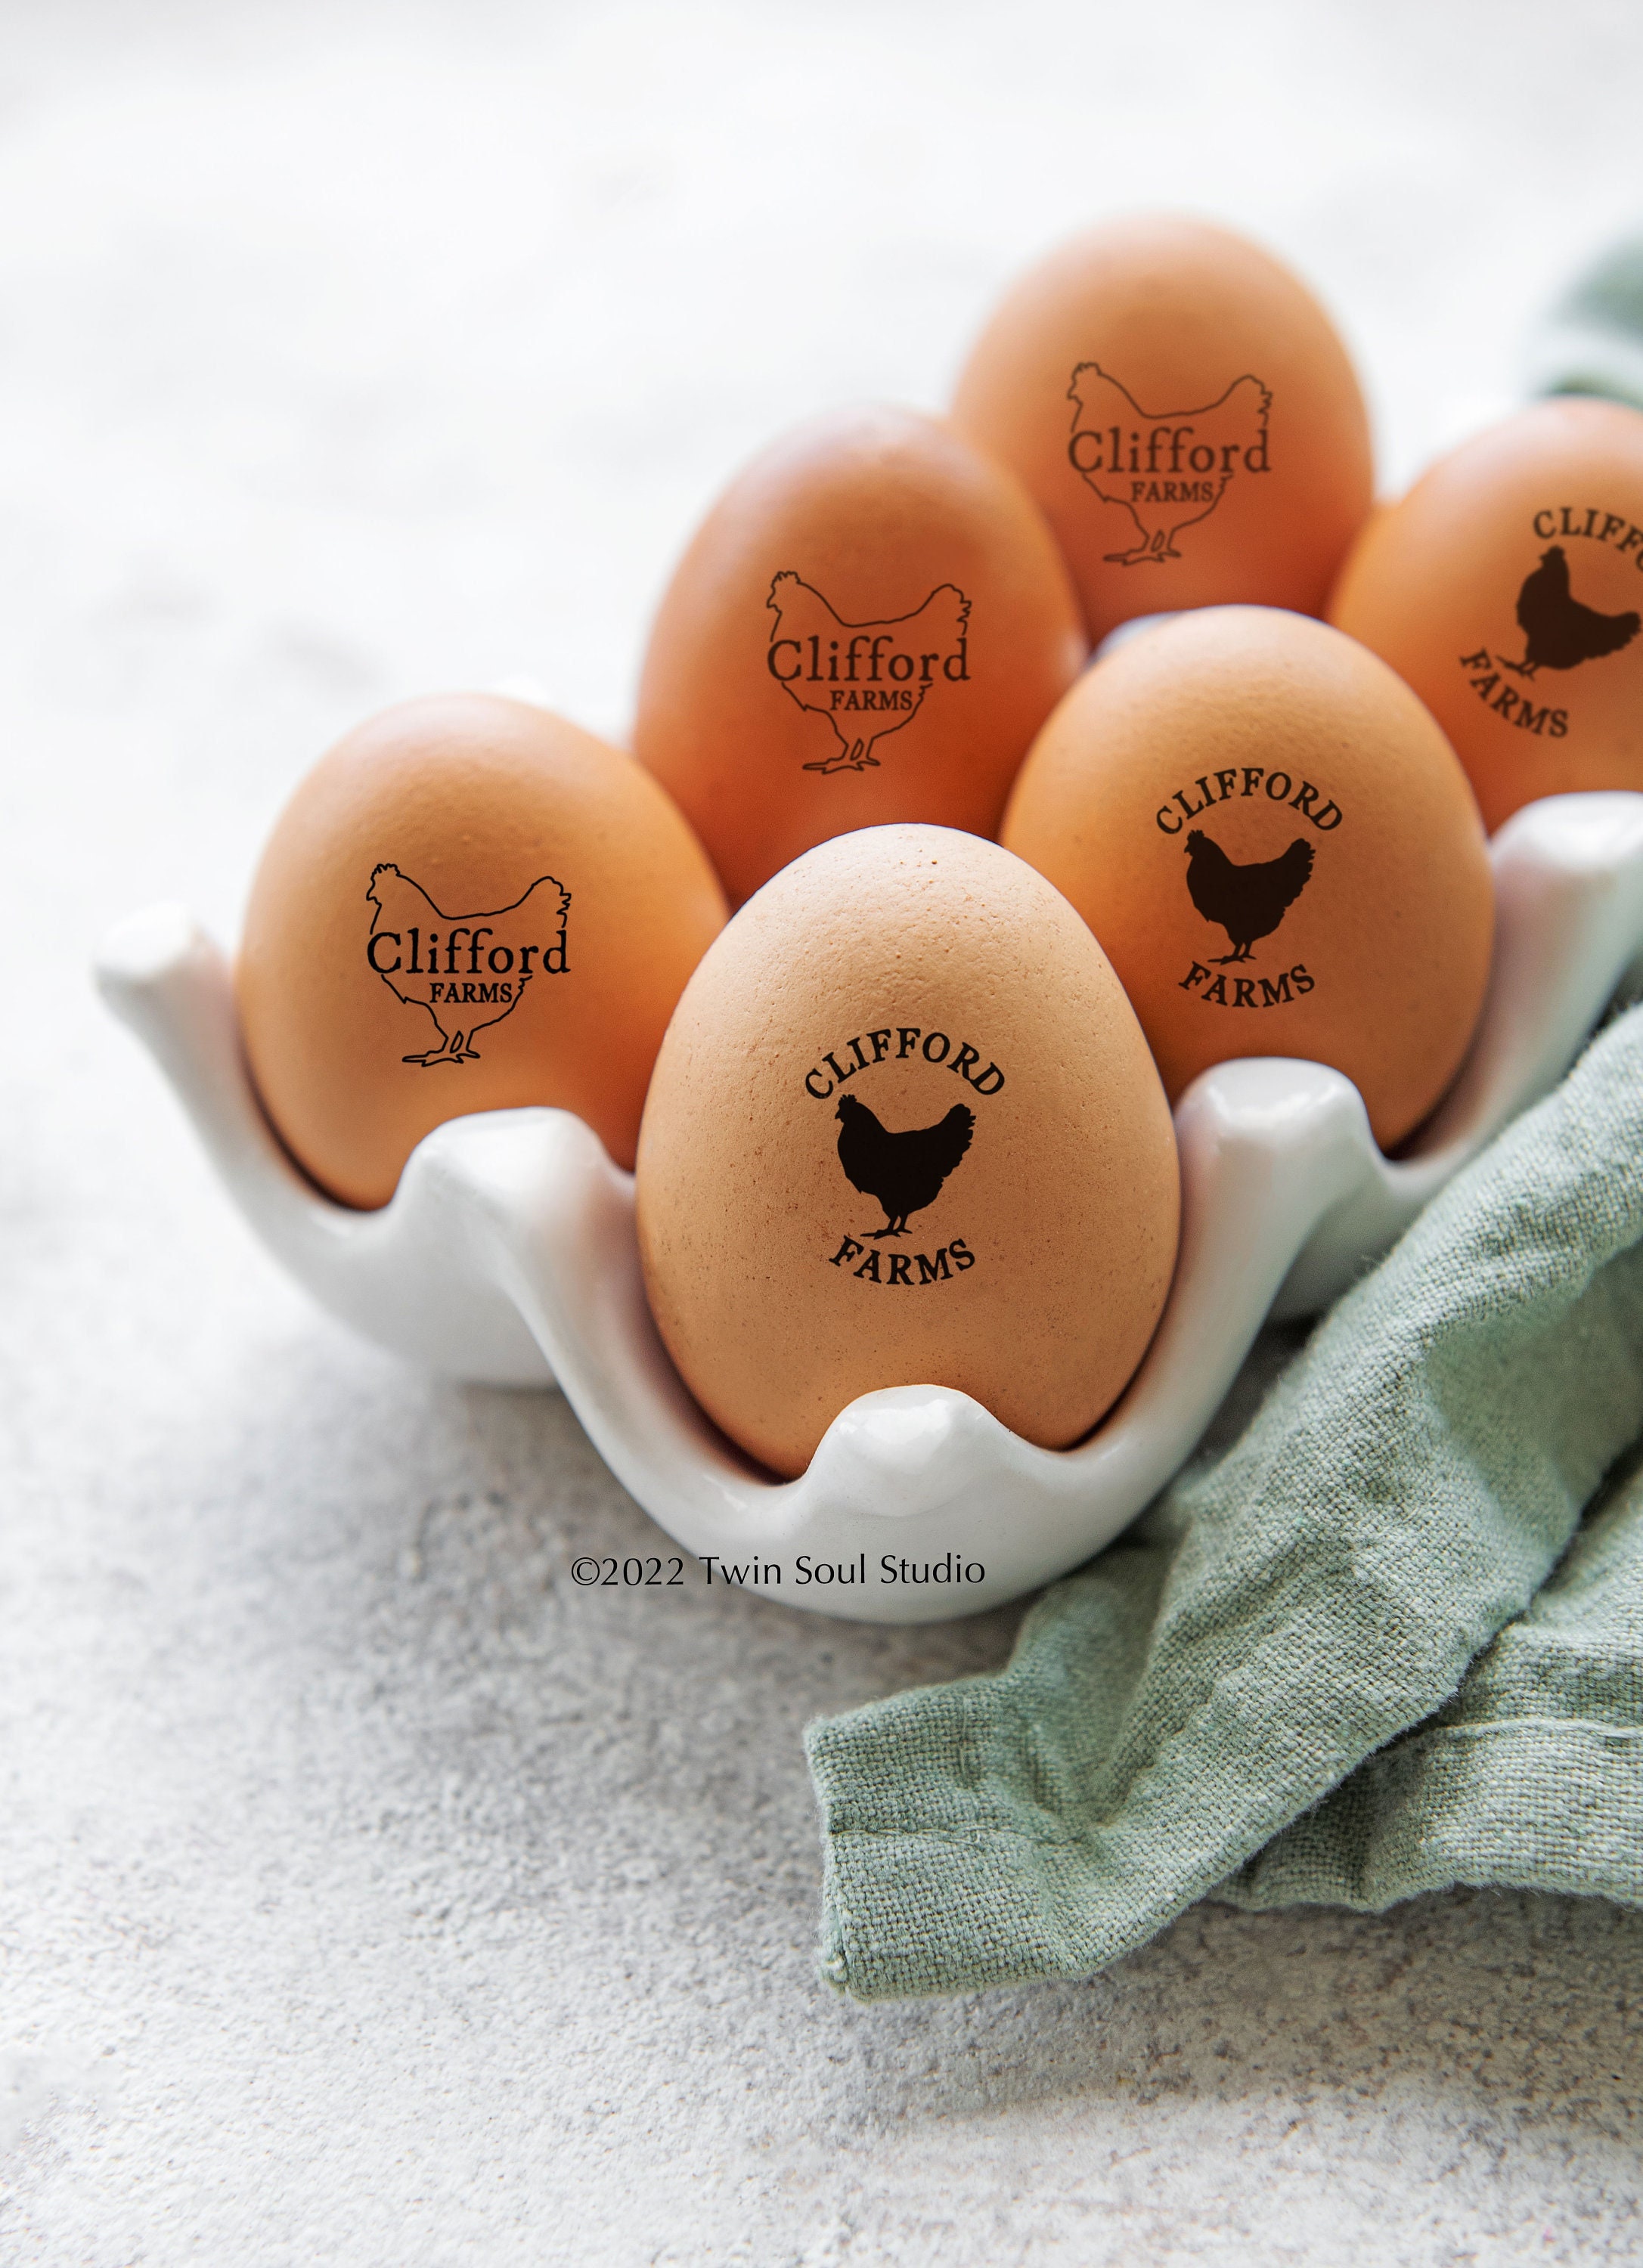  Egg Stamps for Fresh Eggs Personalized Chicken Egg Stamp with  Unique Designs Custom Egg Marking for Farm Chicken Coop Branding Gift  Giving - Design Template - 0.8 : Arts, Crafts & Sewing